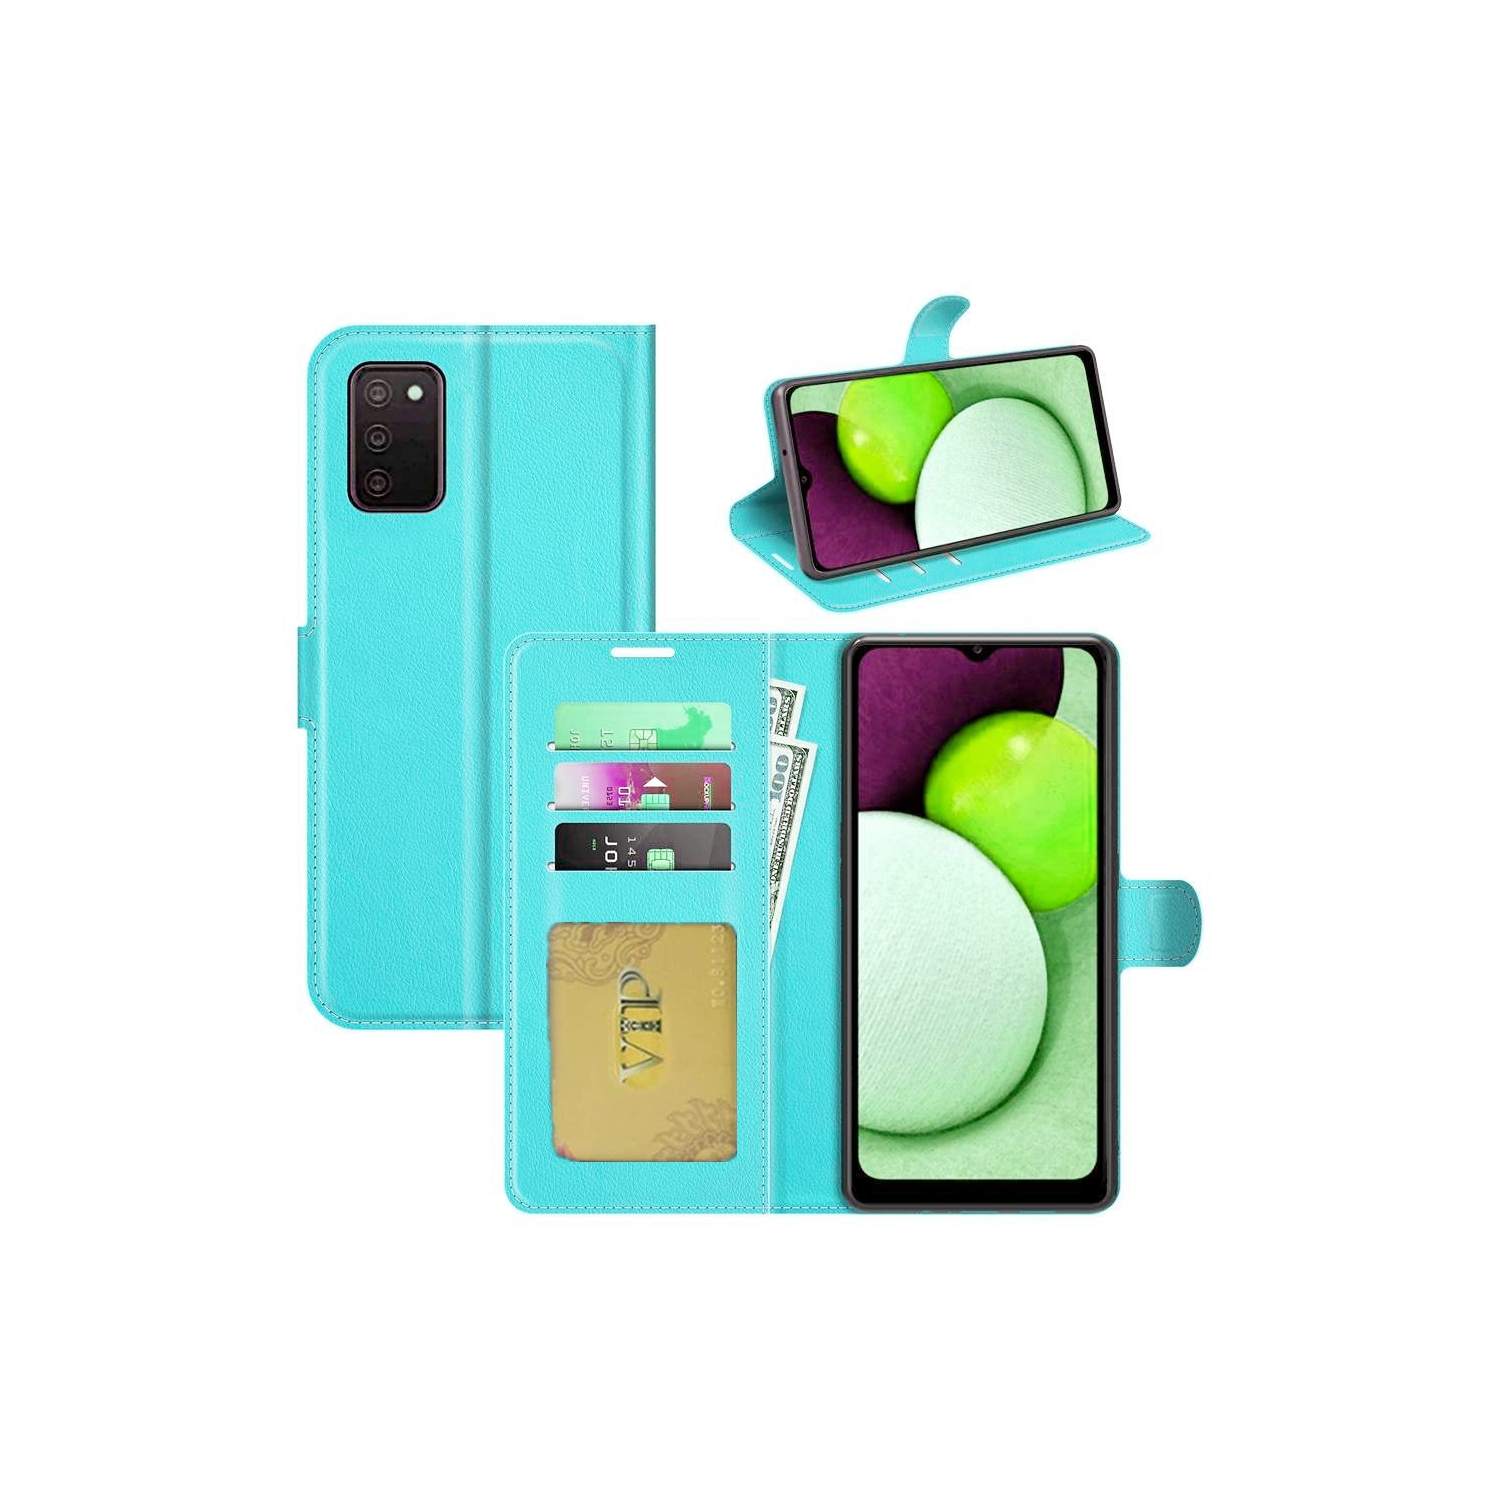 [CS] Samsung Galaxy A03s (Canadian Version) Case, Magnetic Leather Folio Wallet Flip Case Cover with Card Slot, Teal